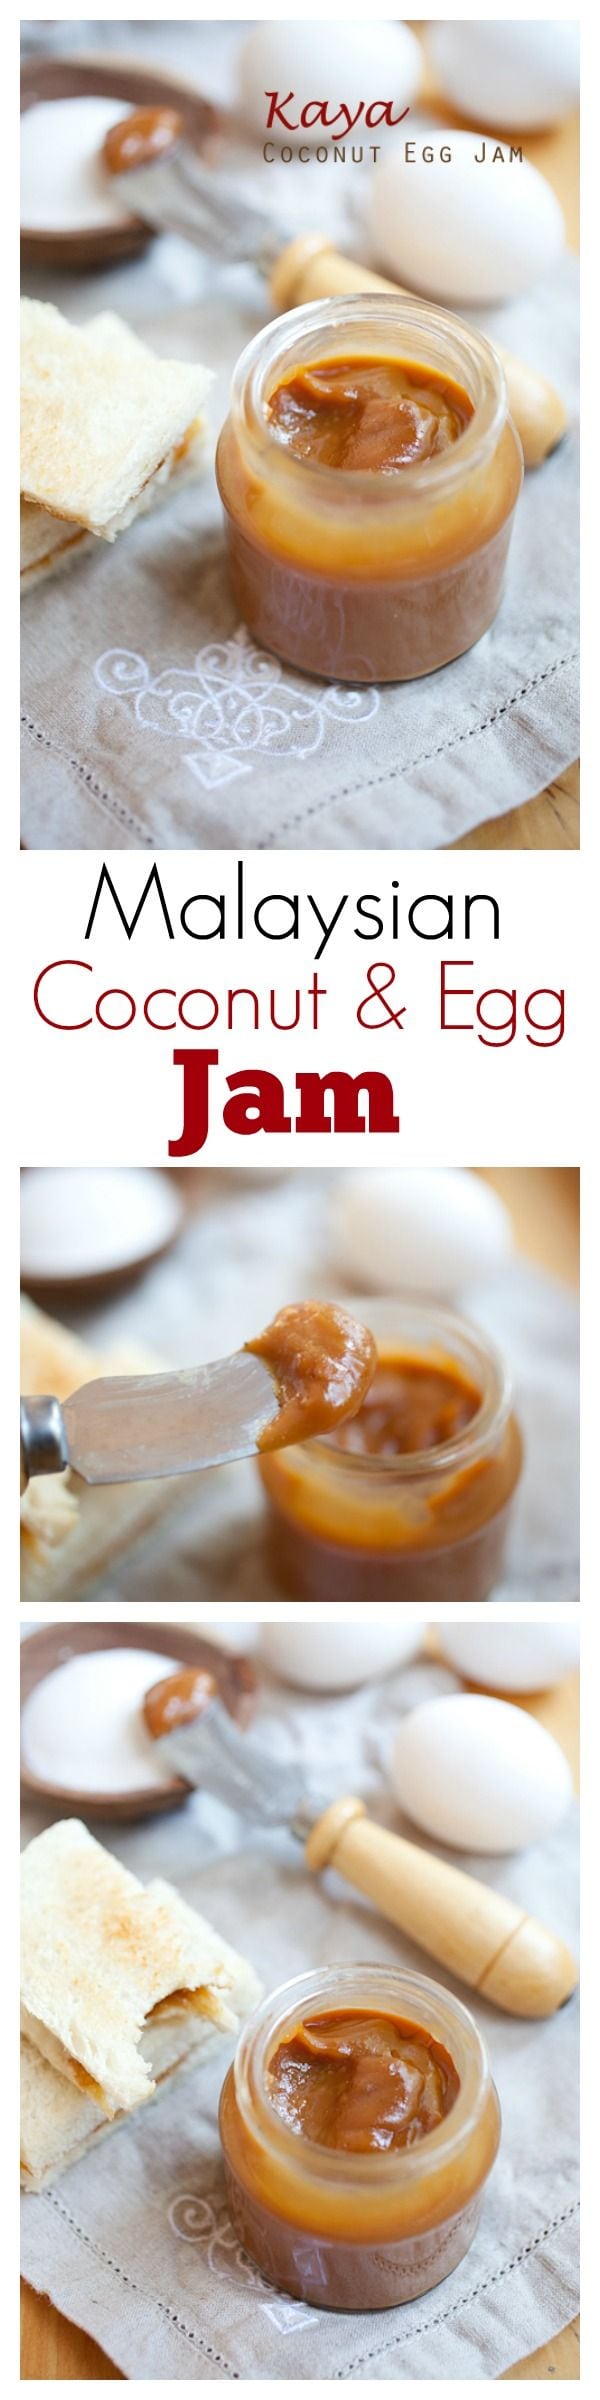 Kaya is a delicious Malaysian jam made with coconut, eggs and caramel. Rich and aromatic jam which is perfect for toast and a cup of coffee | rasamalaysia.com